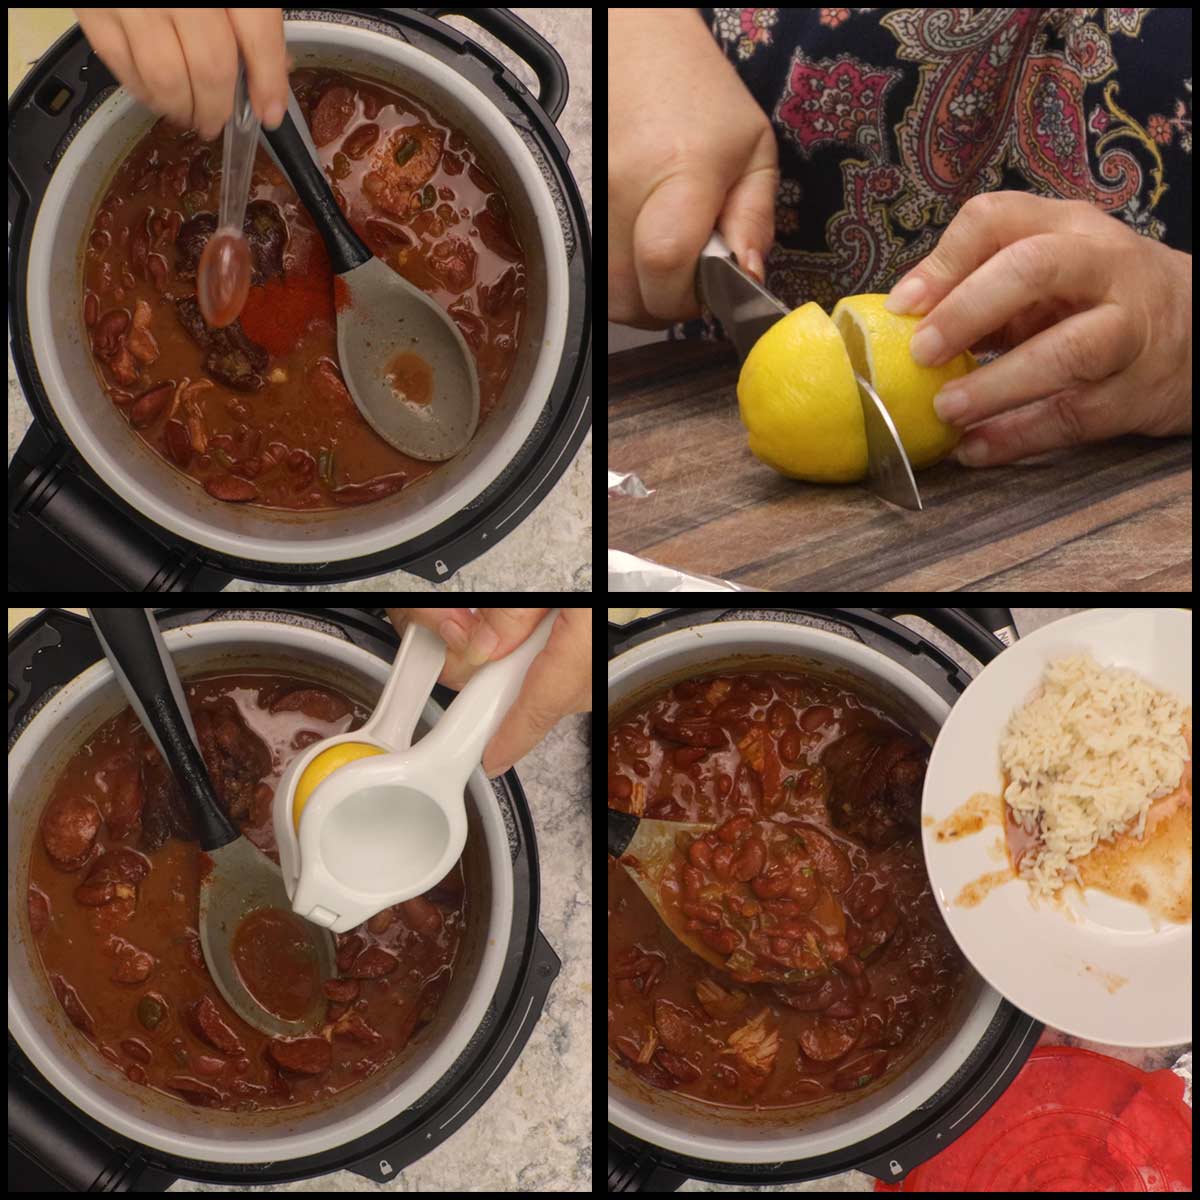 adding the paprika and lemon juice just before serving.